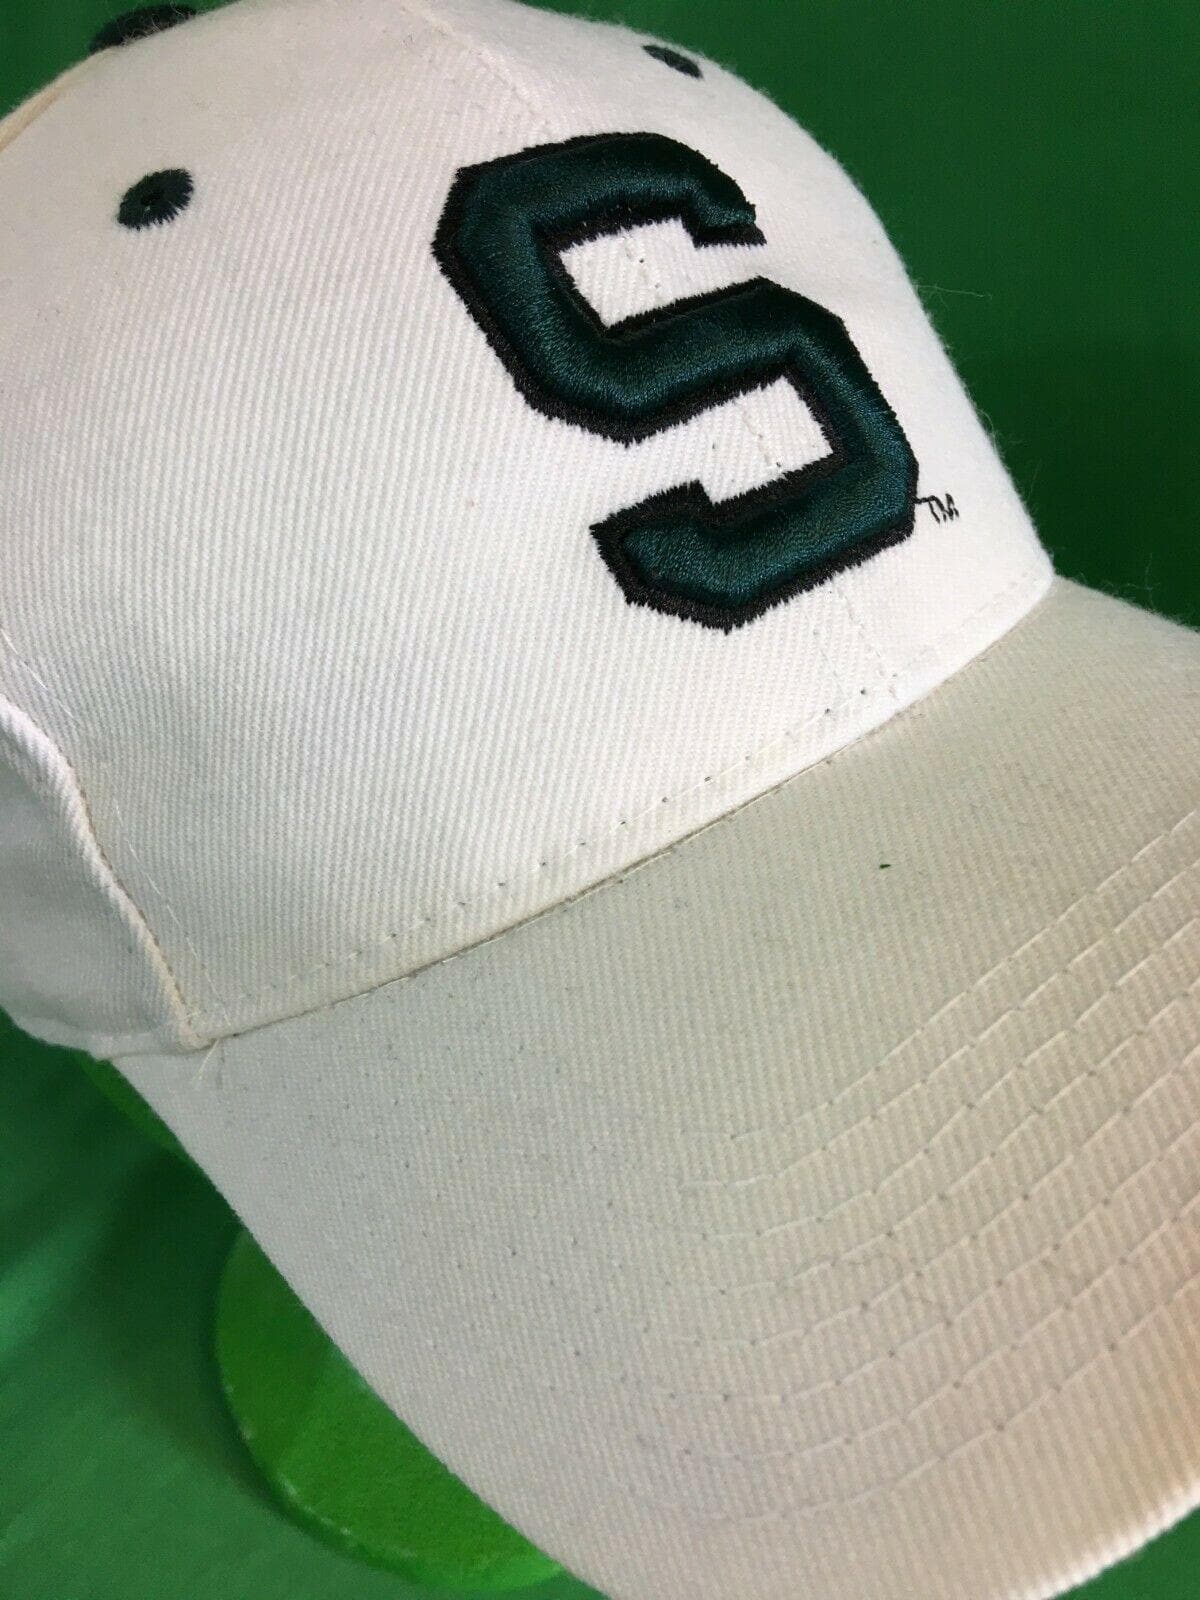 NCAA Michigan State Spartans Zephyr White Youth Hat/Cap 6-3/4 NWT